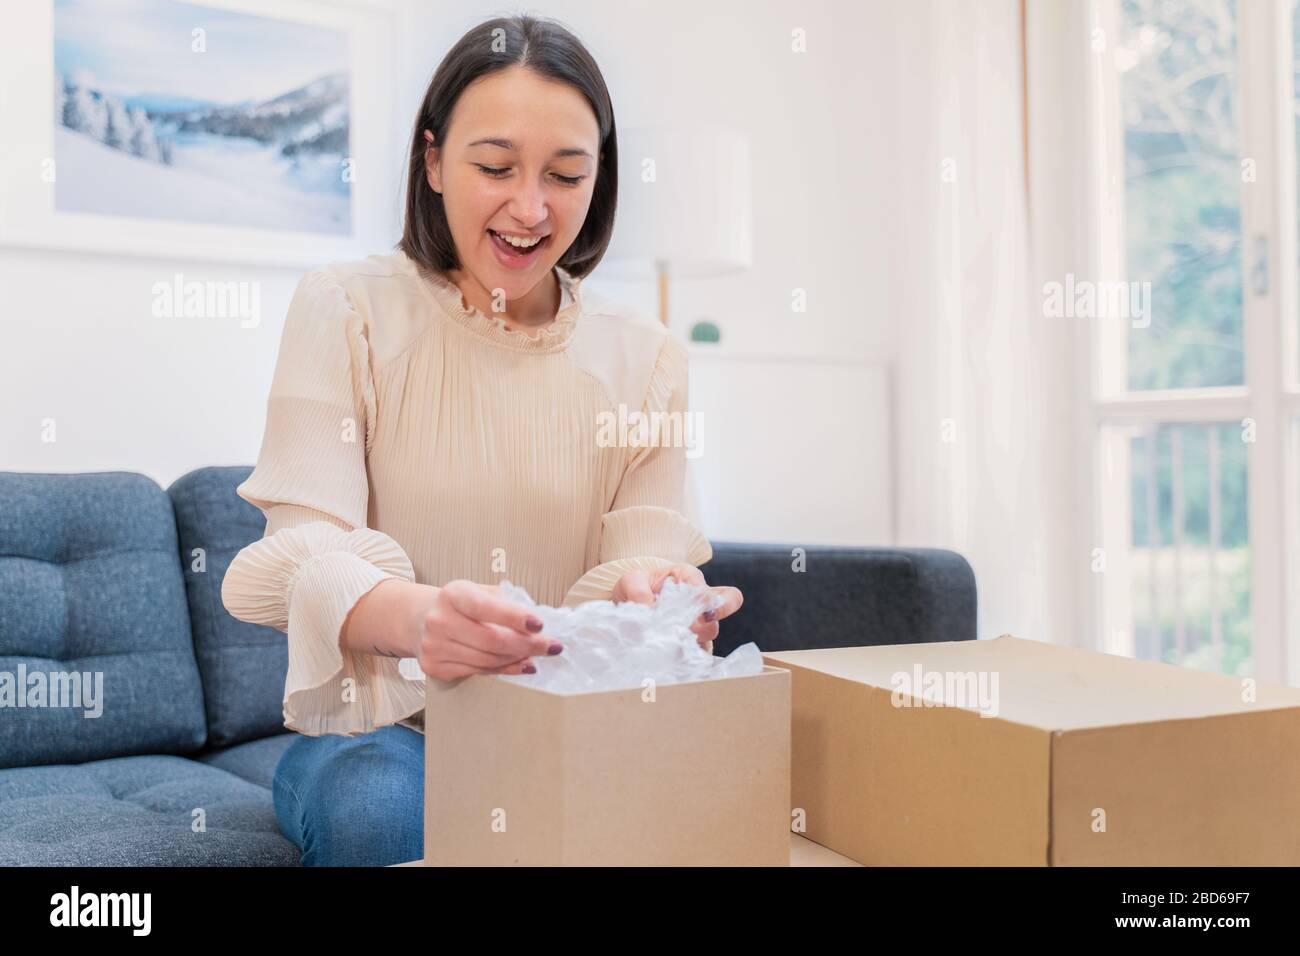 Woman feeling happy with received order at home Stock Photo